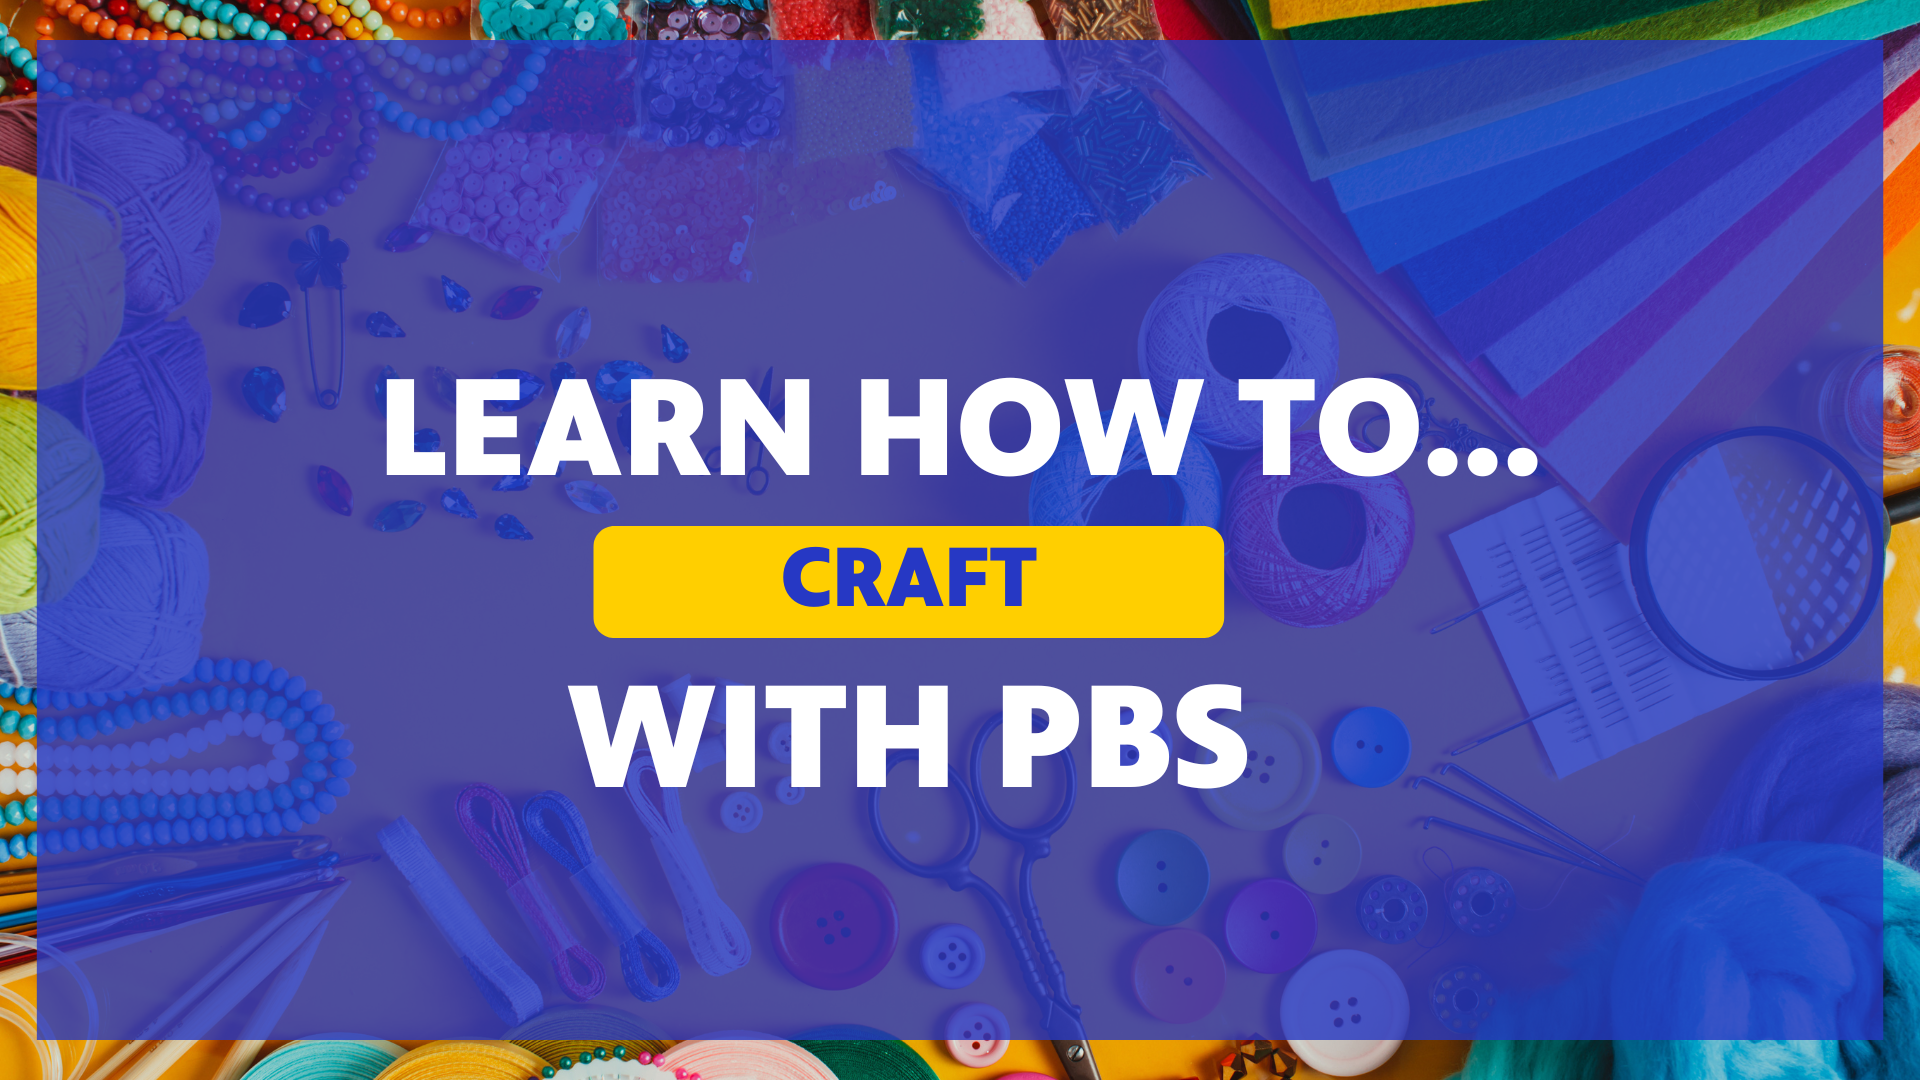 Learn How to Craft with PBS